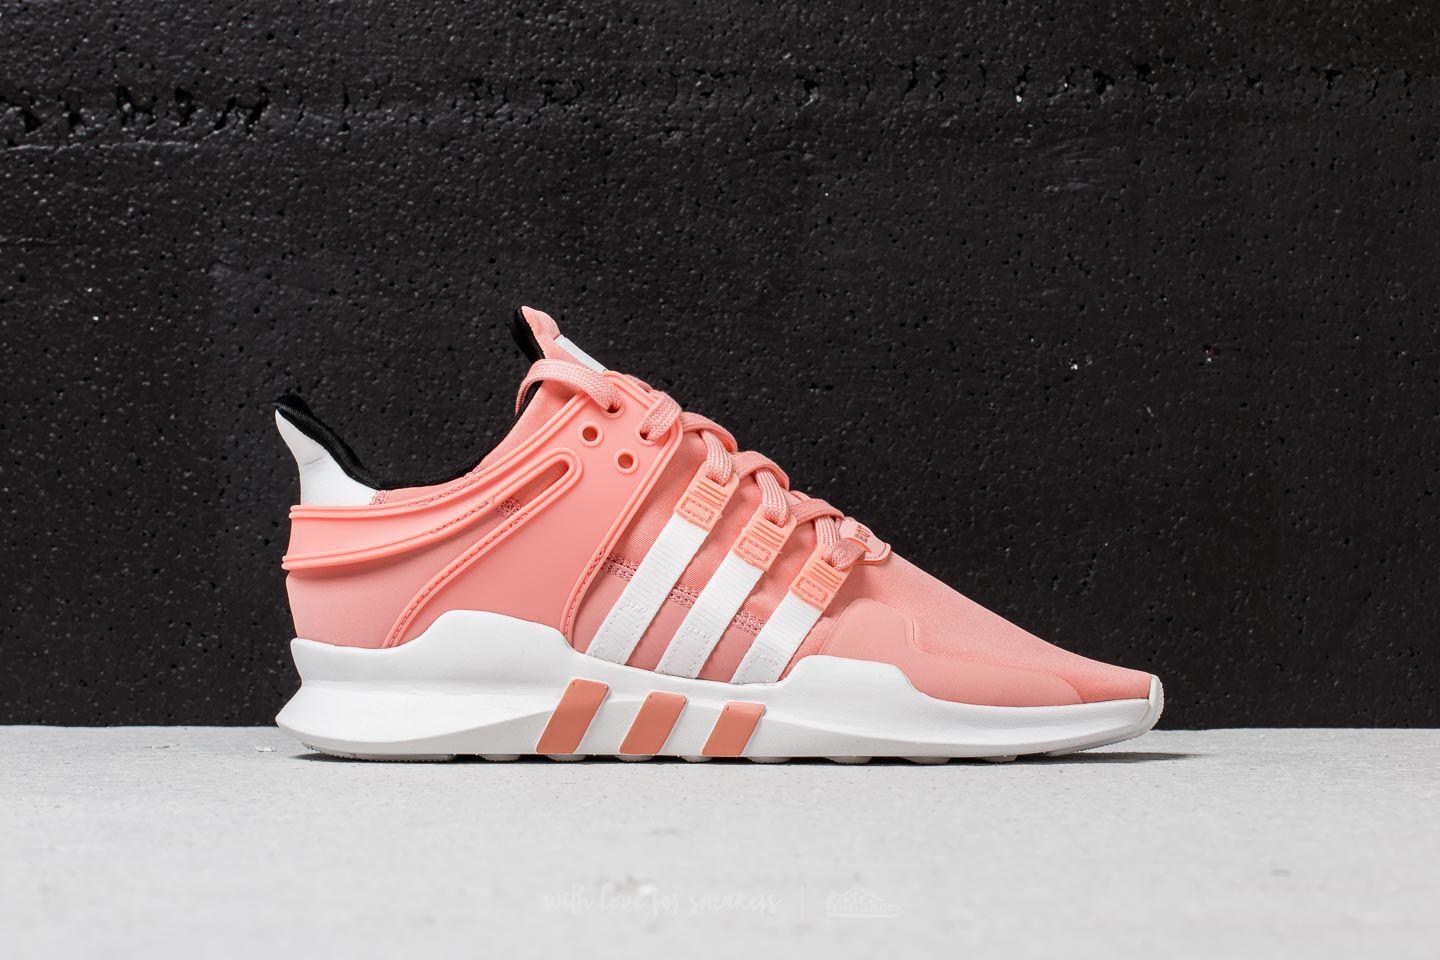 buy > adidas eqt support adv rosa, Up to 74% OFF